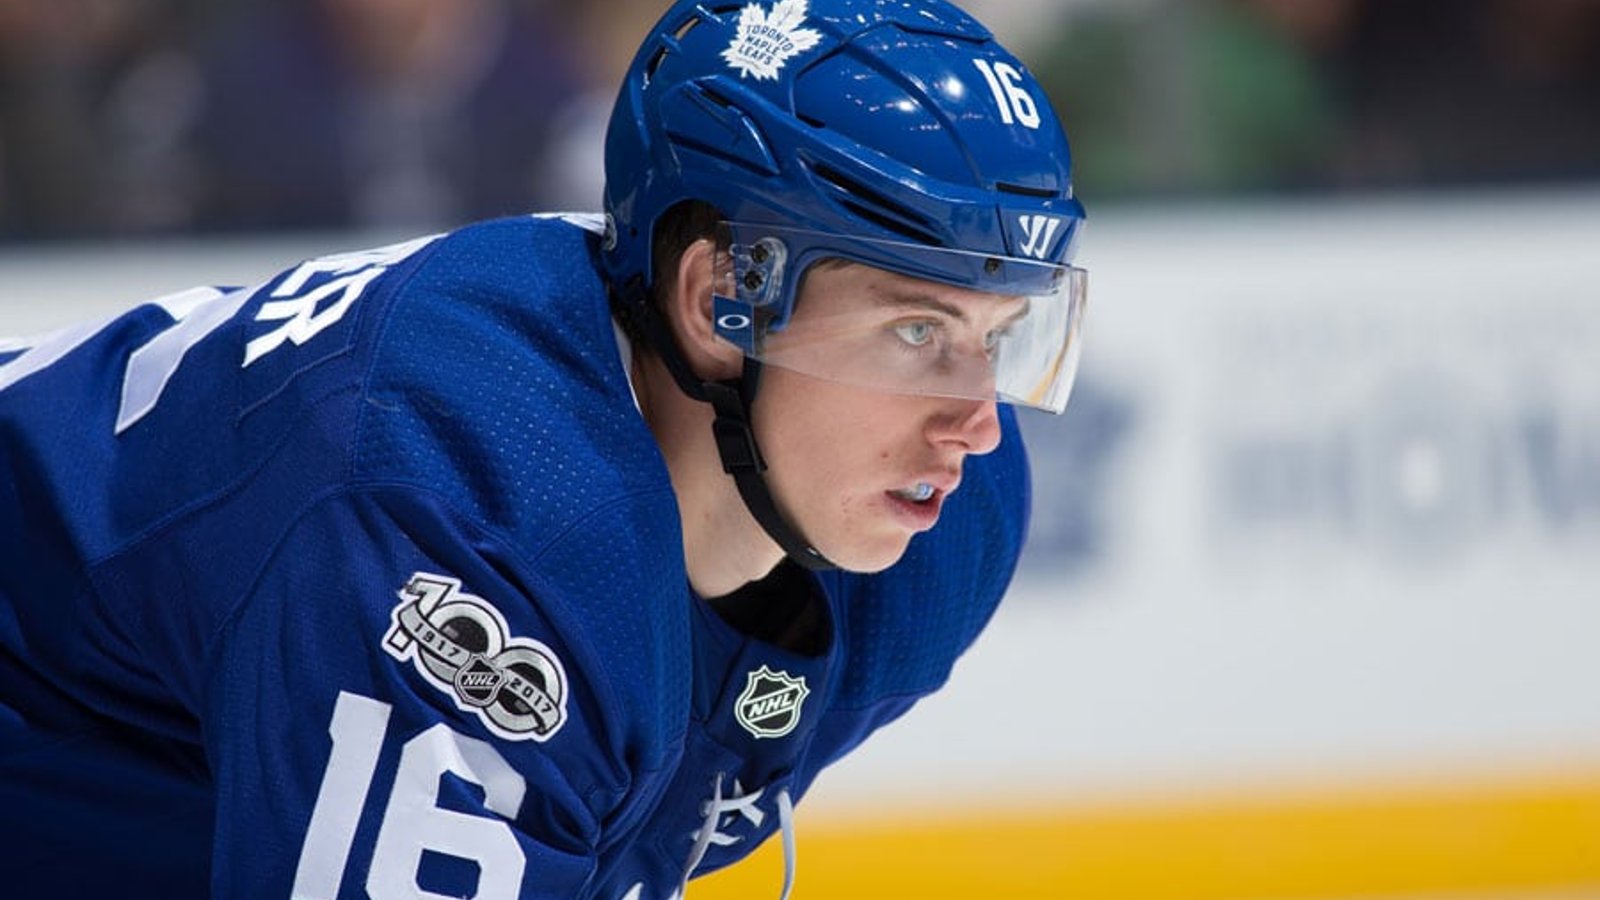 Marner ends contract talks with Toronto and will meet with other teams! 